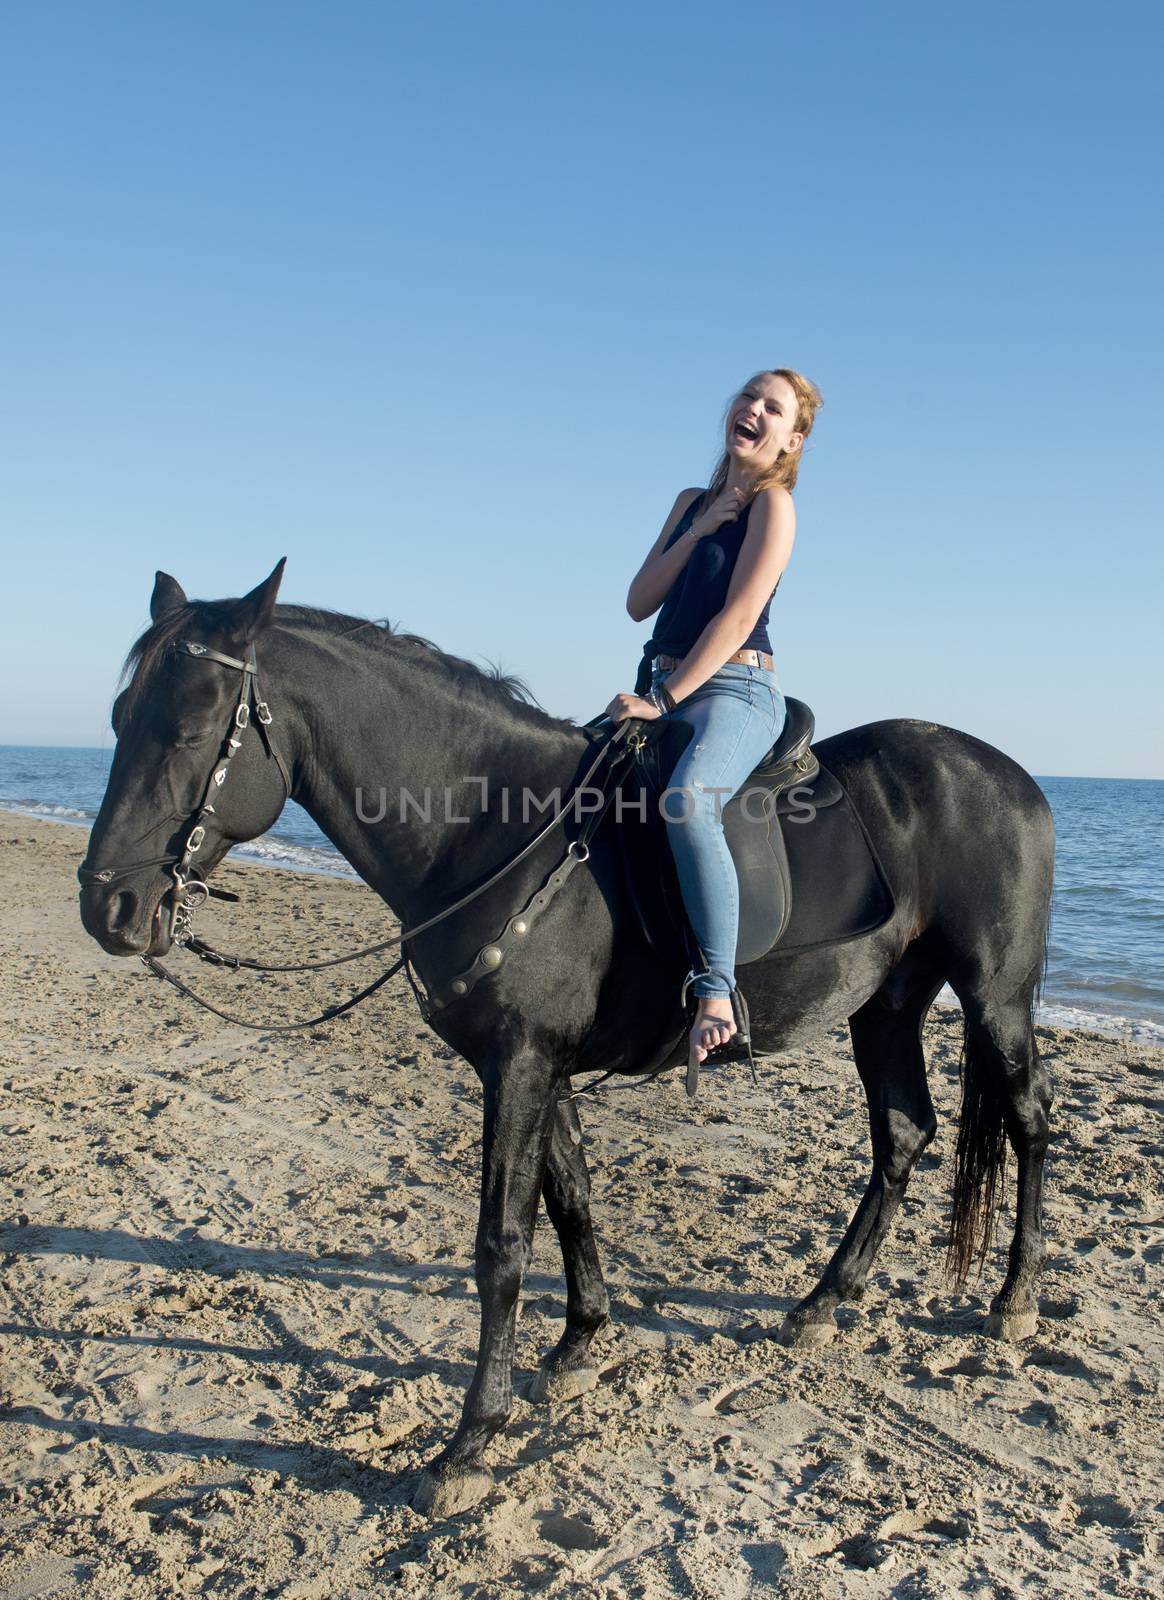 laughing woman and black horse on the beach